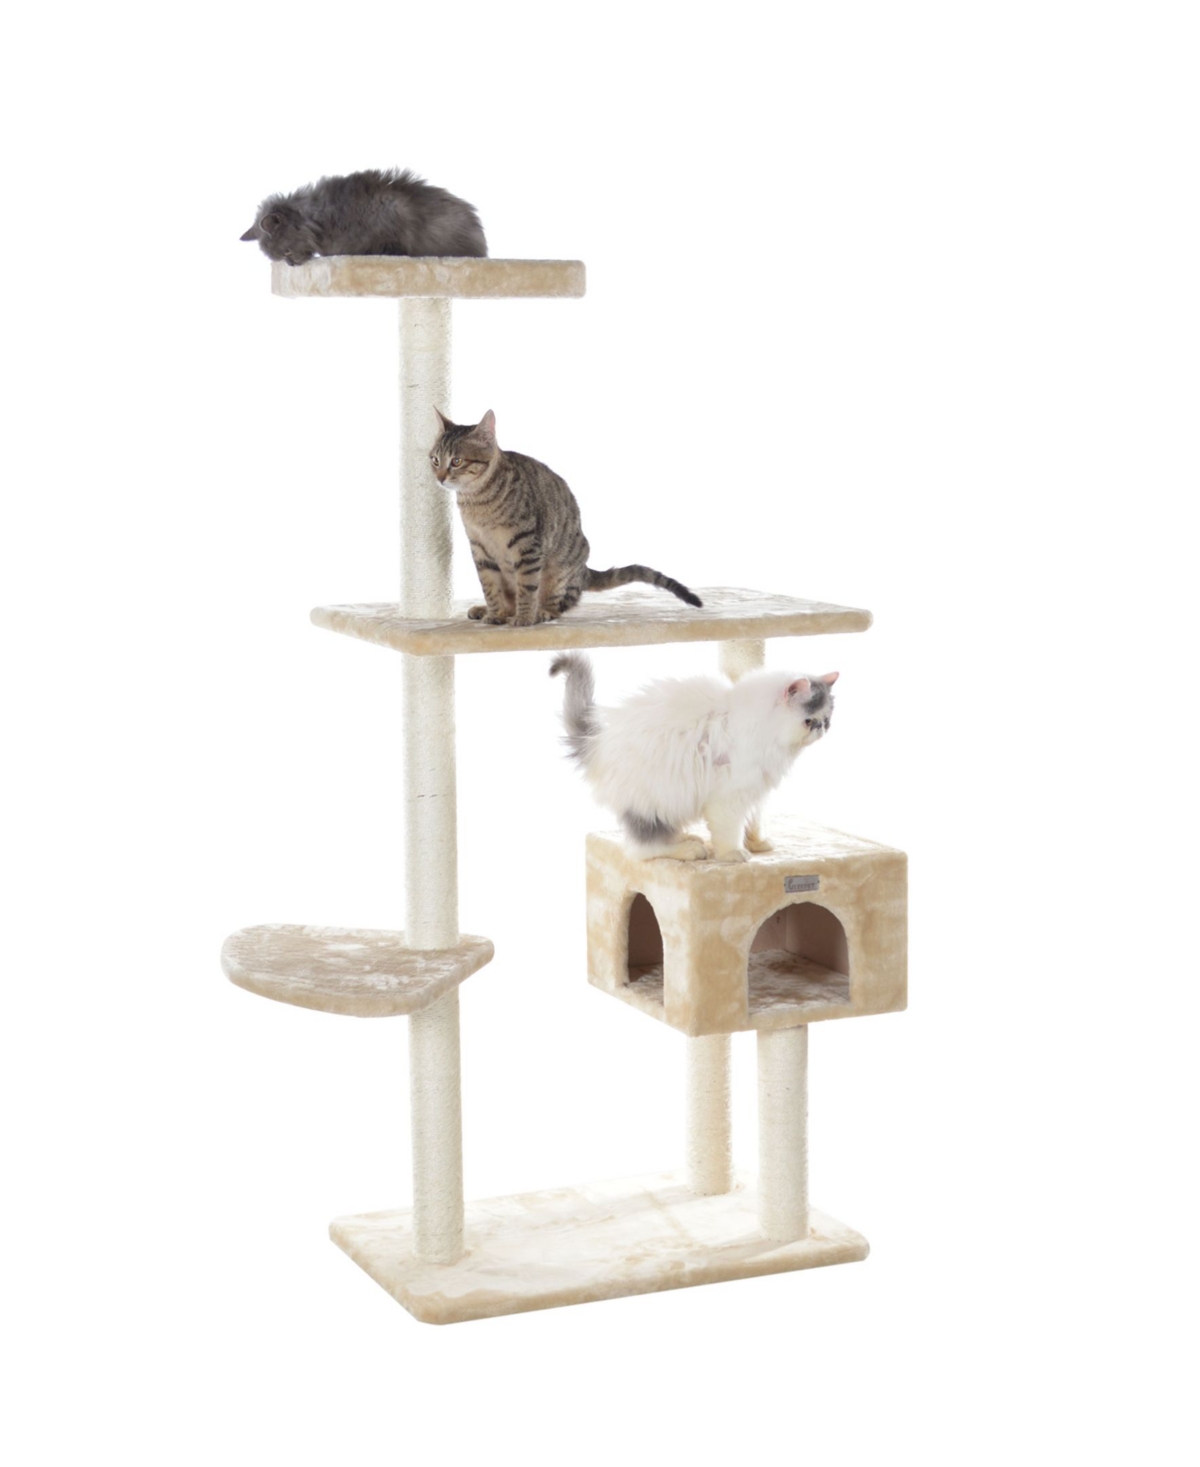 57-Inch Real Wood Cat Tree With Perch & Playhouse - Beige